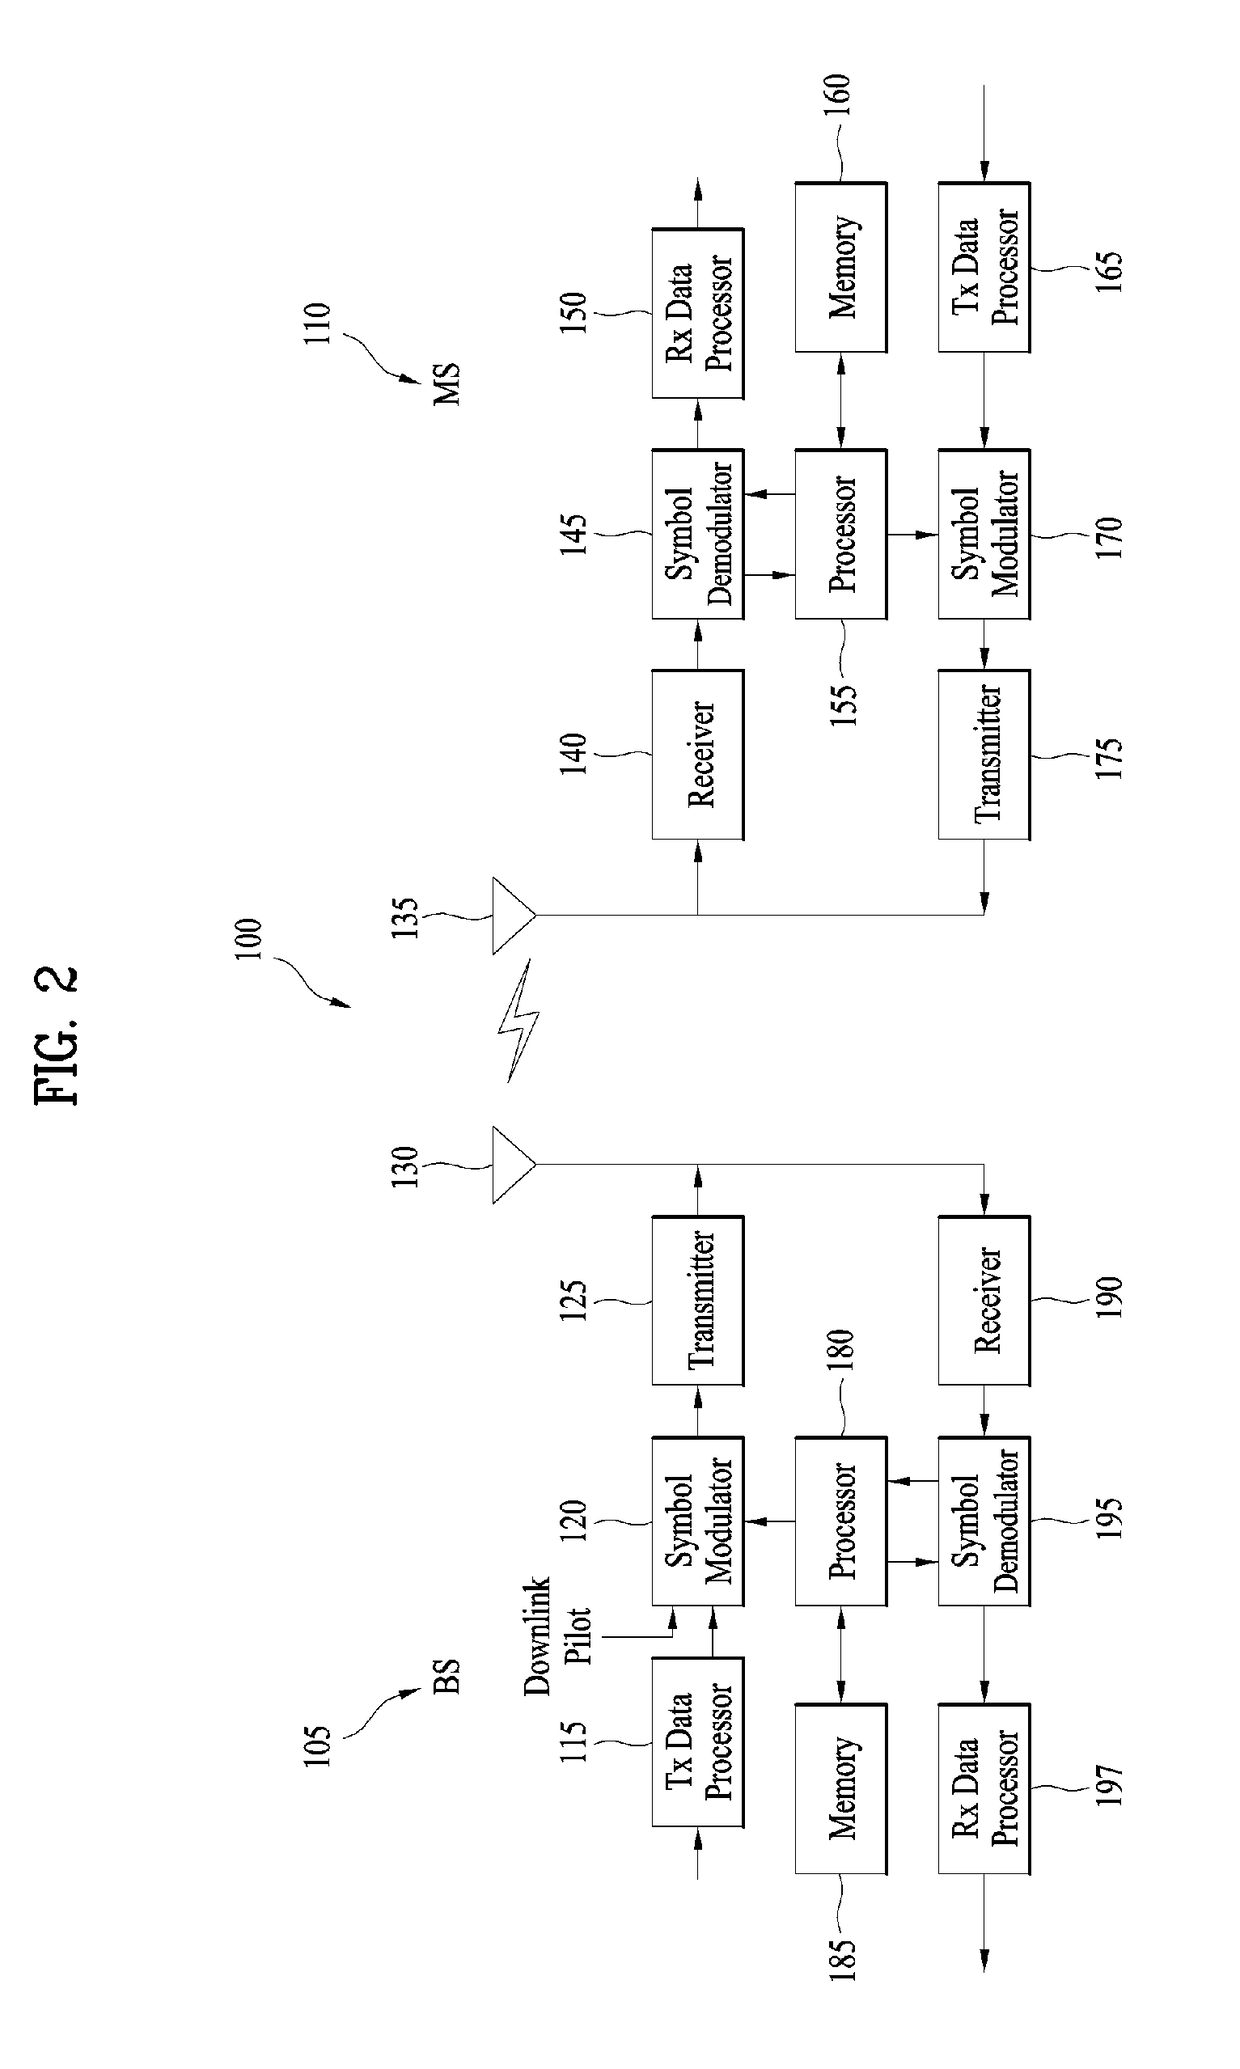 Method for controlling self-interference duplication signal for removing self-interference in environment supporting full-duplex radio (FDR) communication, and apparatus therefor